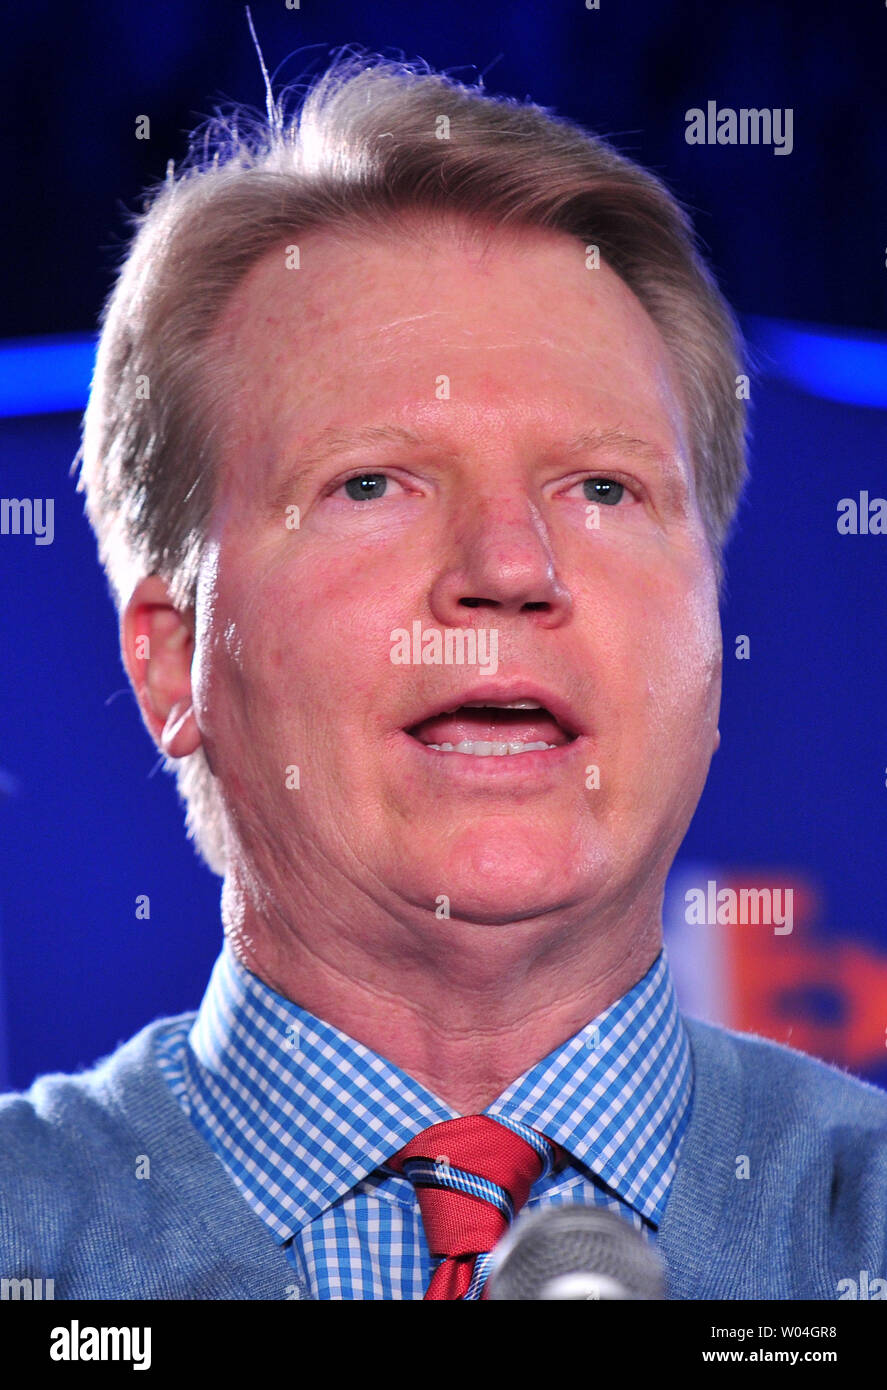 Commentator Phil Simms delivers remarks during the FedEx 2011 Air and Ground NFL Player of the Year awards ceremony in Indianapolis during Super Bowl week on February 1, 2012, 2012.  UPI/Kevin Dietsch Stock Photo